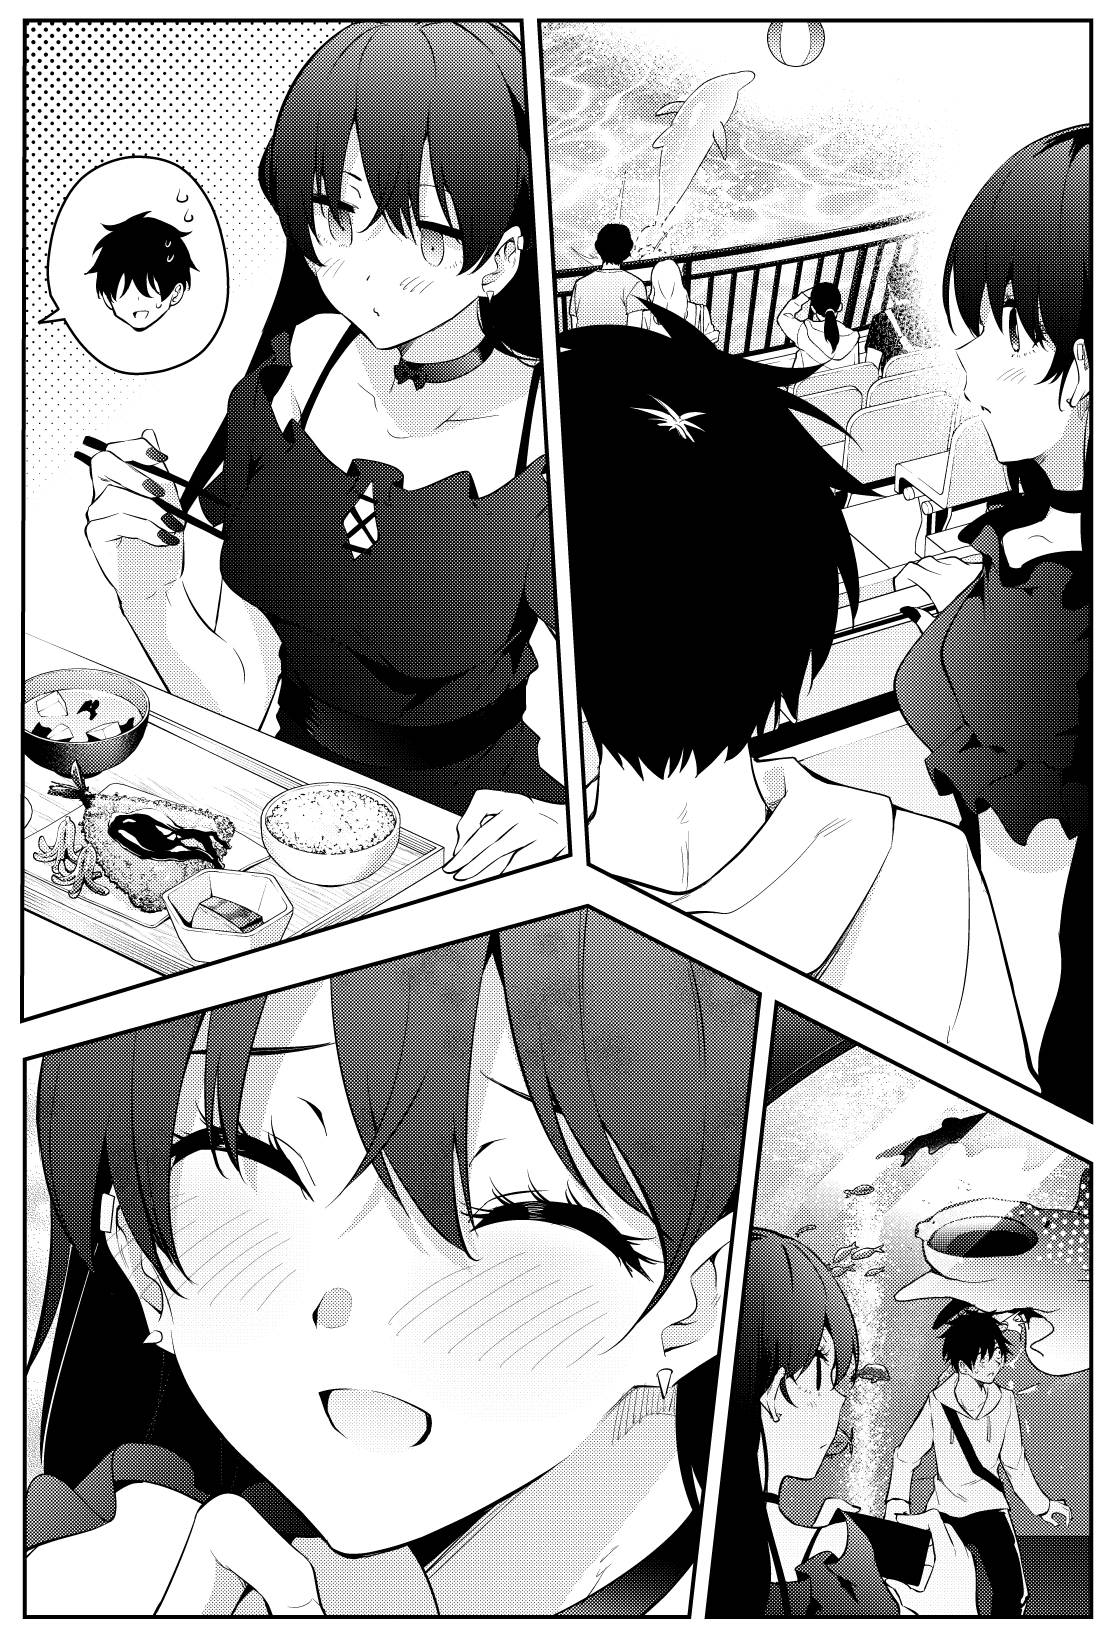 The Story Of A Manga Artist Confined By A Strange High School Girl - chapter 44 - #5